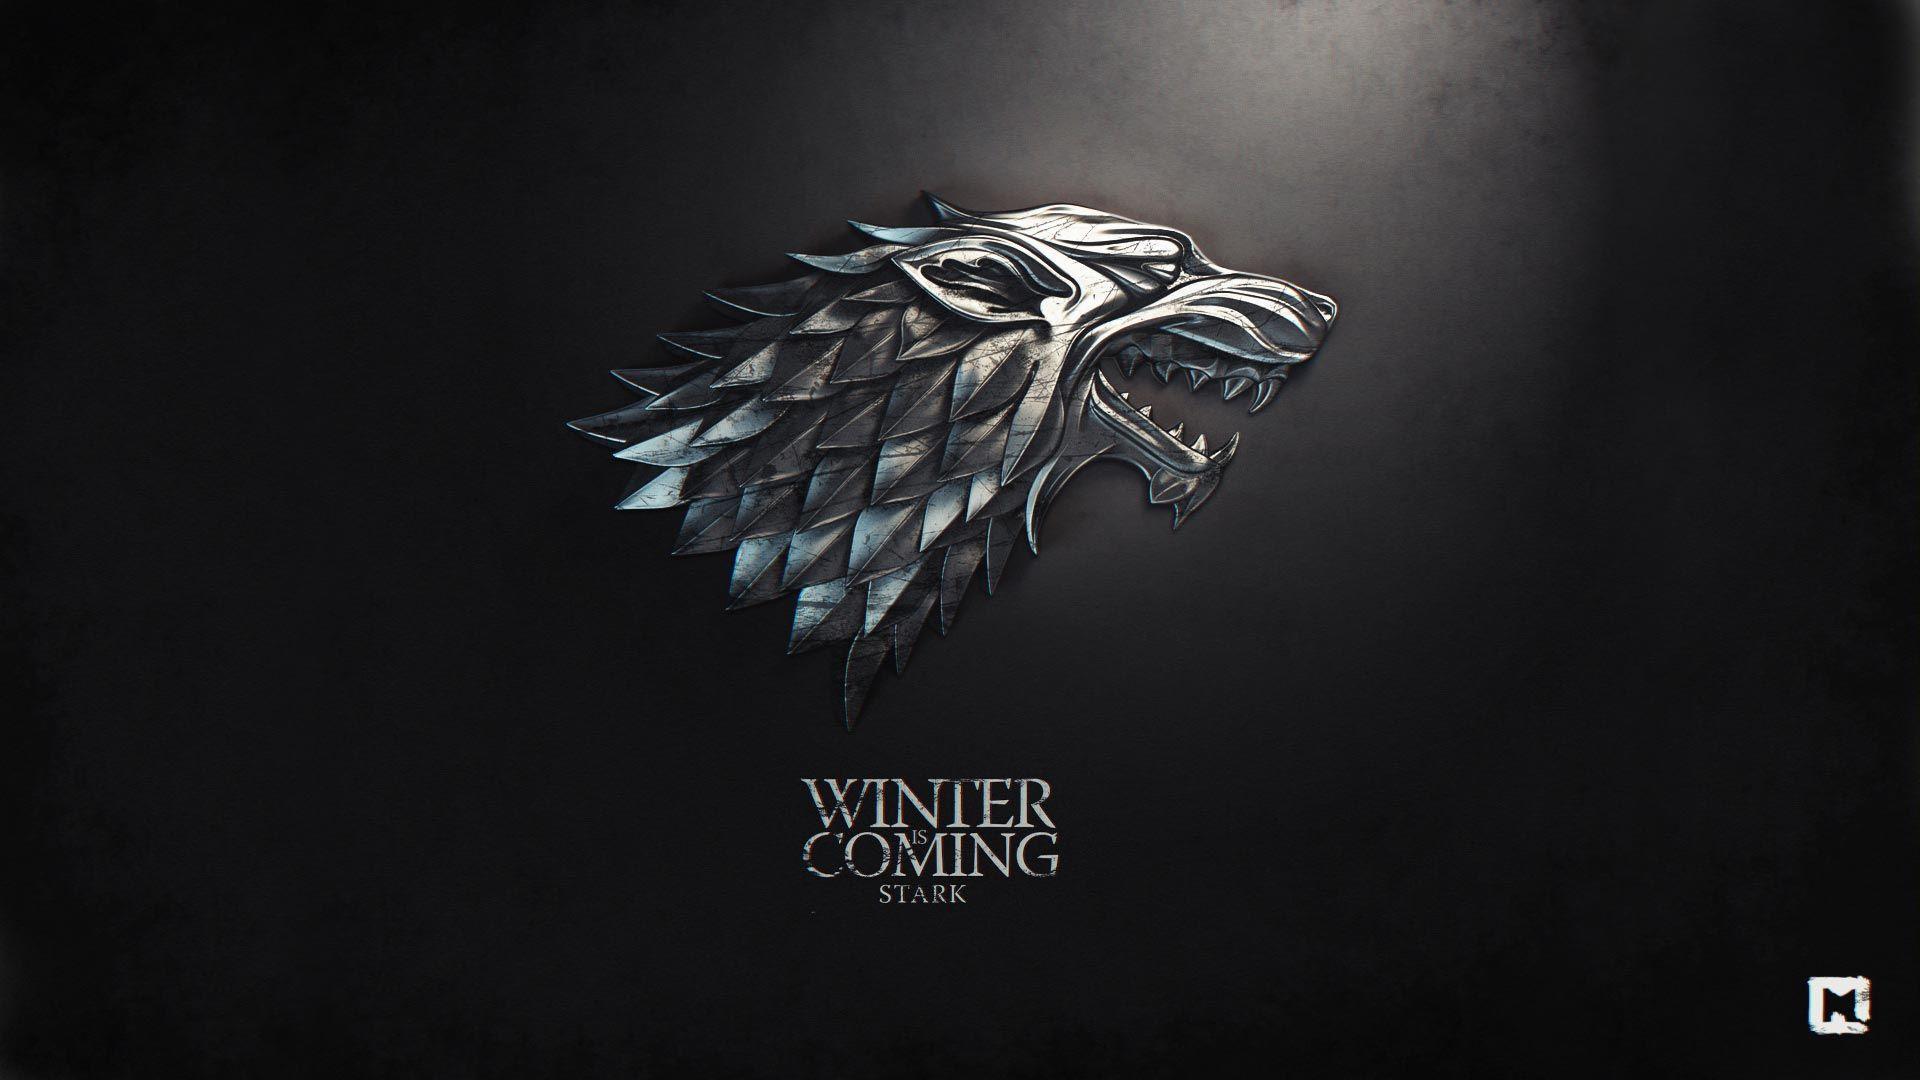 Houses of Game of Thrones Theme for Windows 10